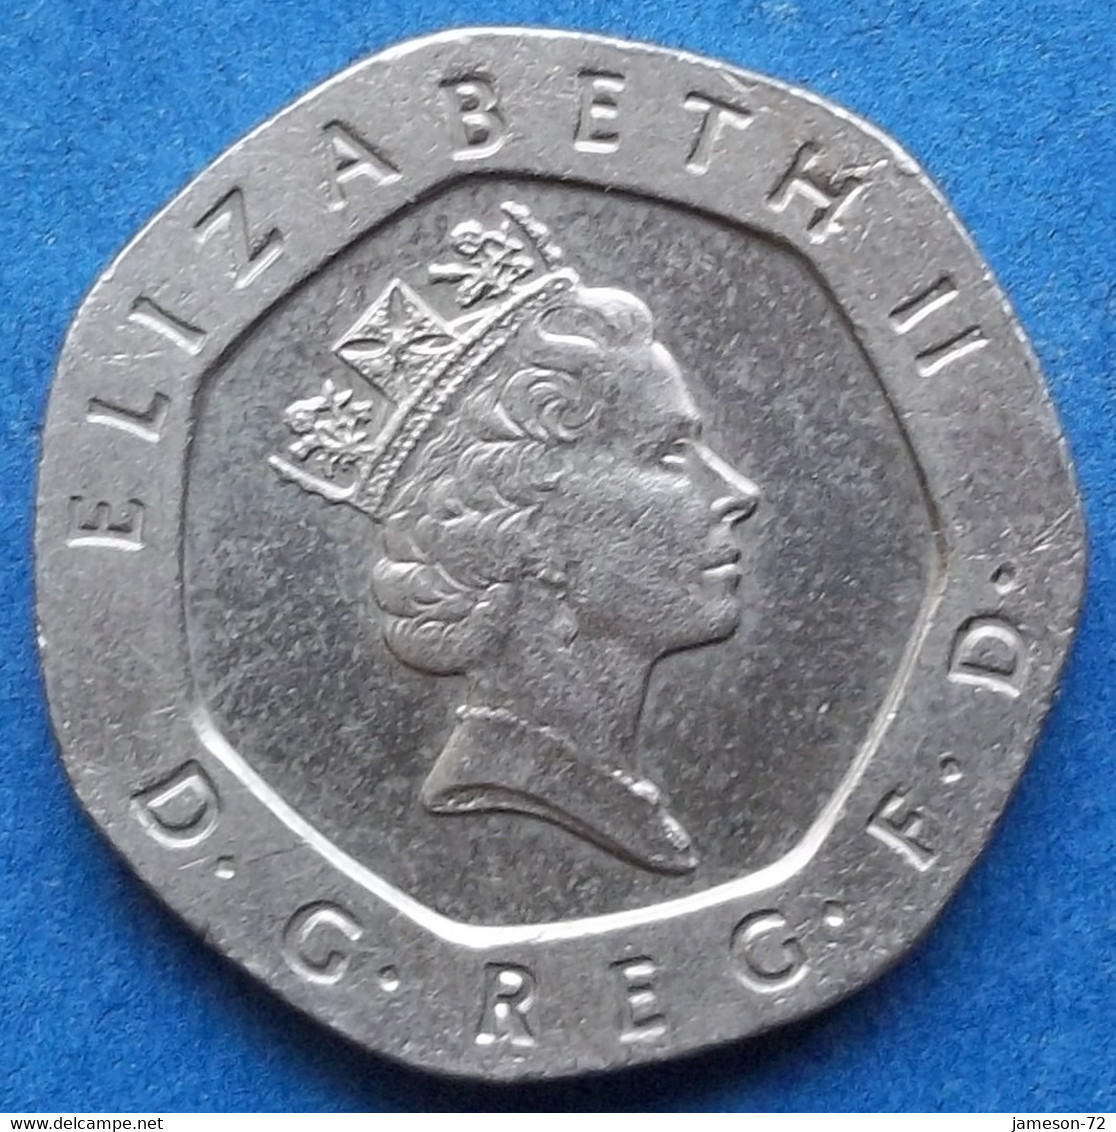 UK - 20 Pence 1997 KM# 939 Elizabeth II Decimal Coinage (1971) - Edelweiss Coins - 20 Pence